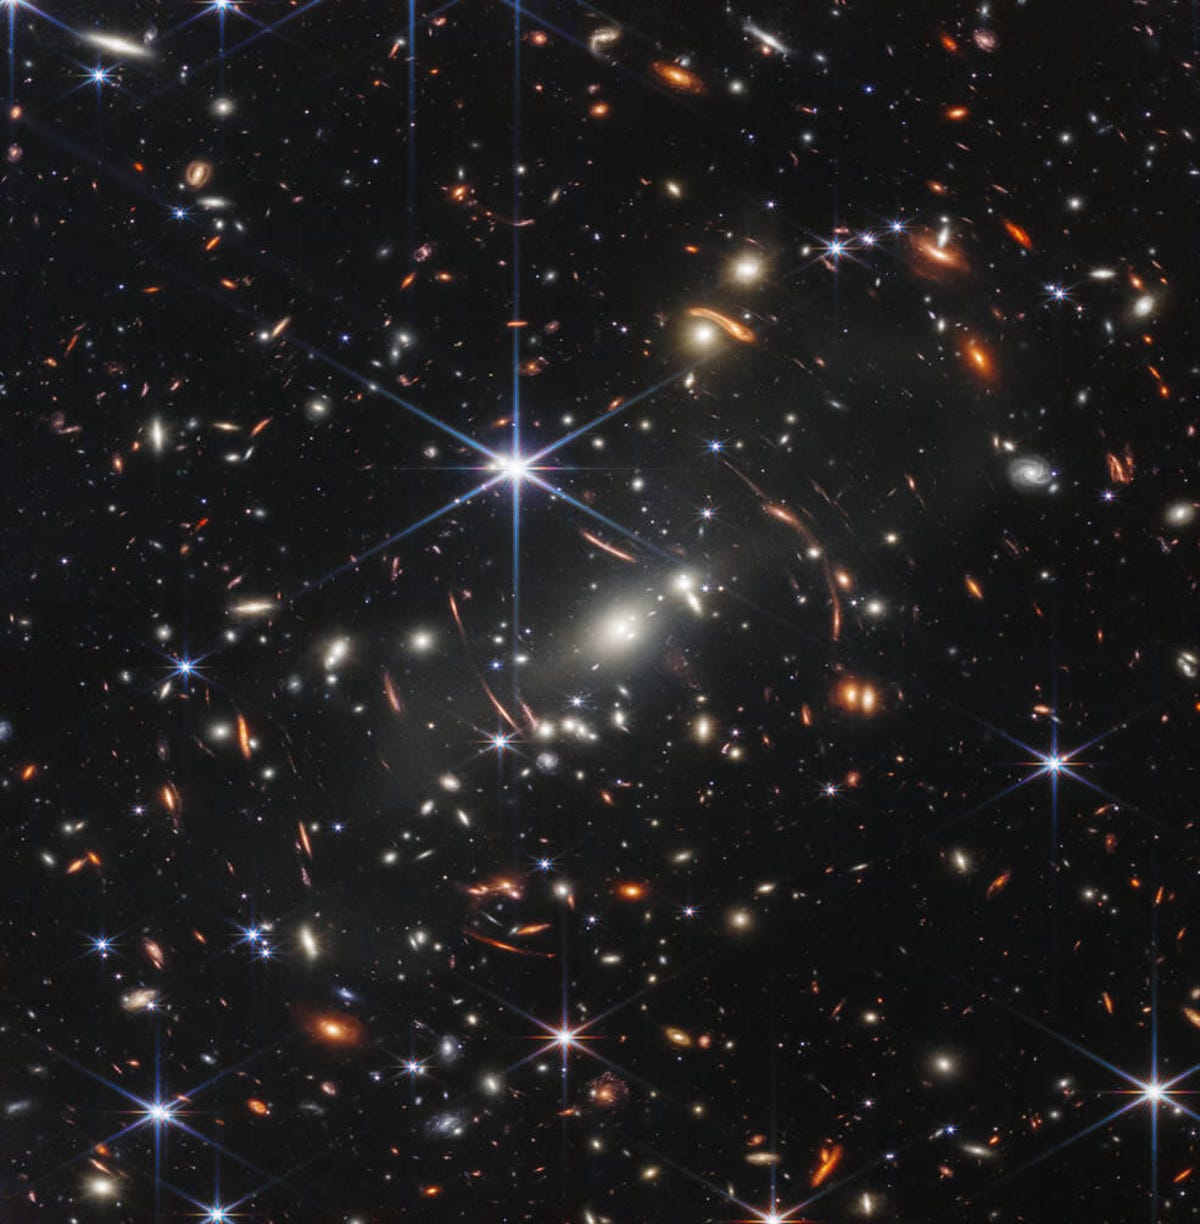 View of hundreds (perhaps thousands) of galaxies in deep space